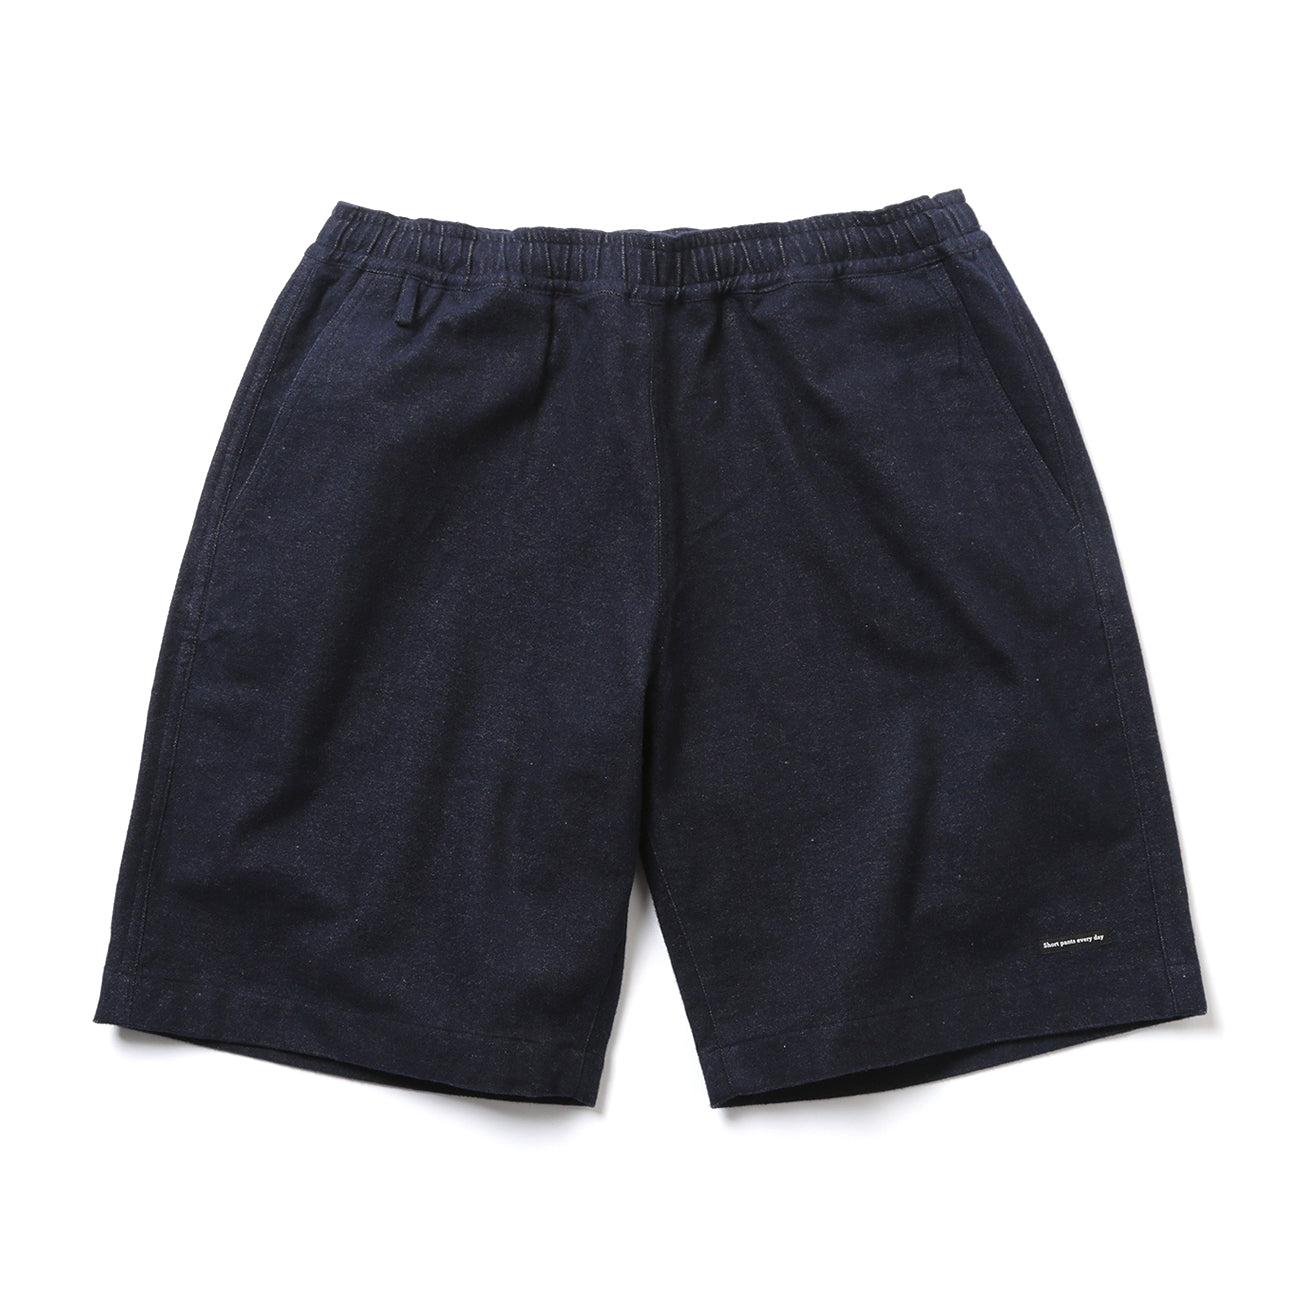 ALL PRODUCTS | Short pants every day